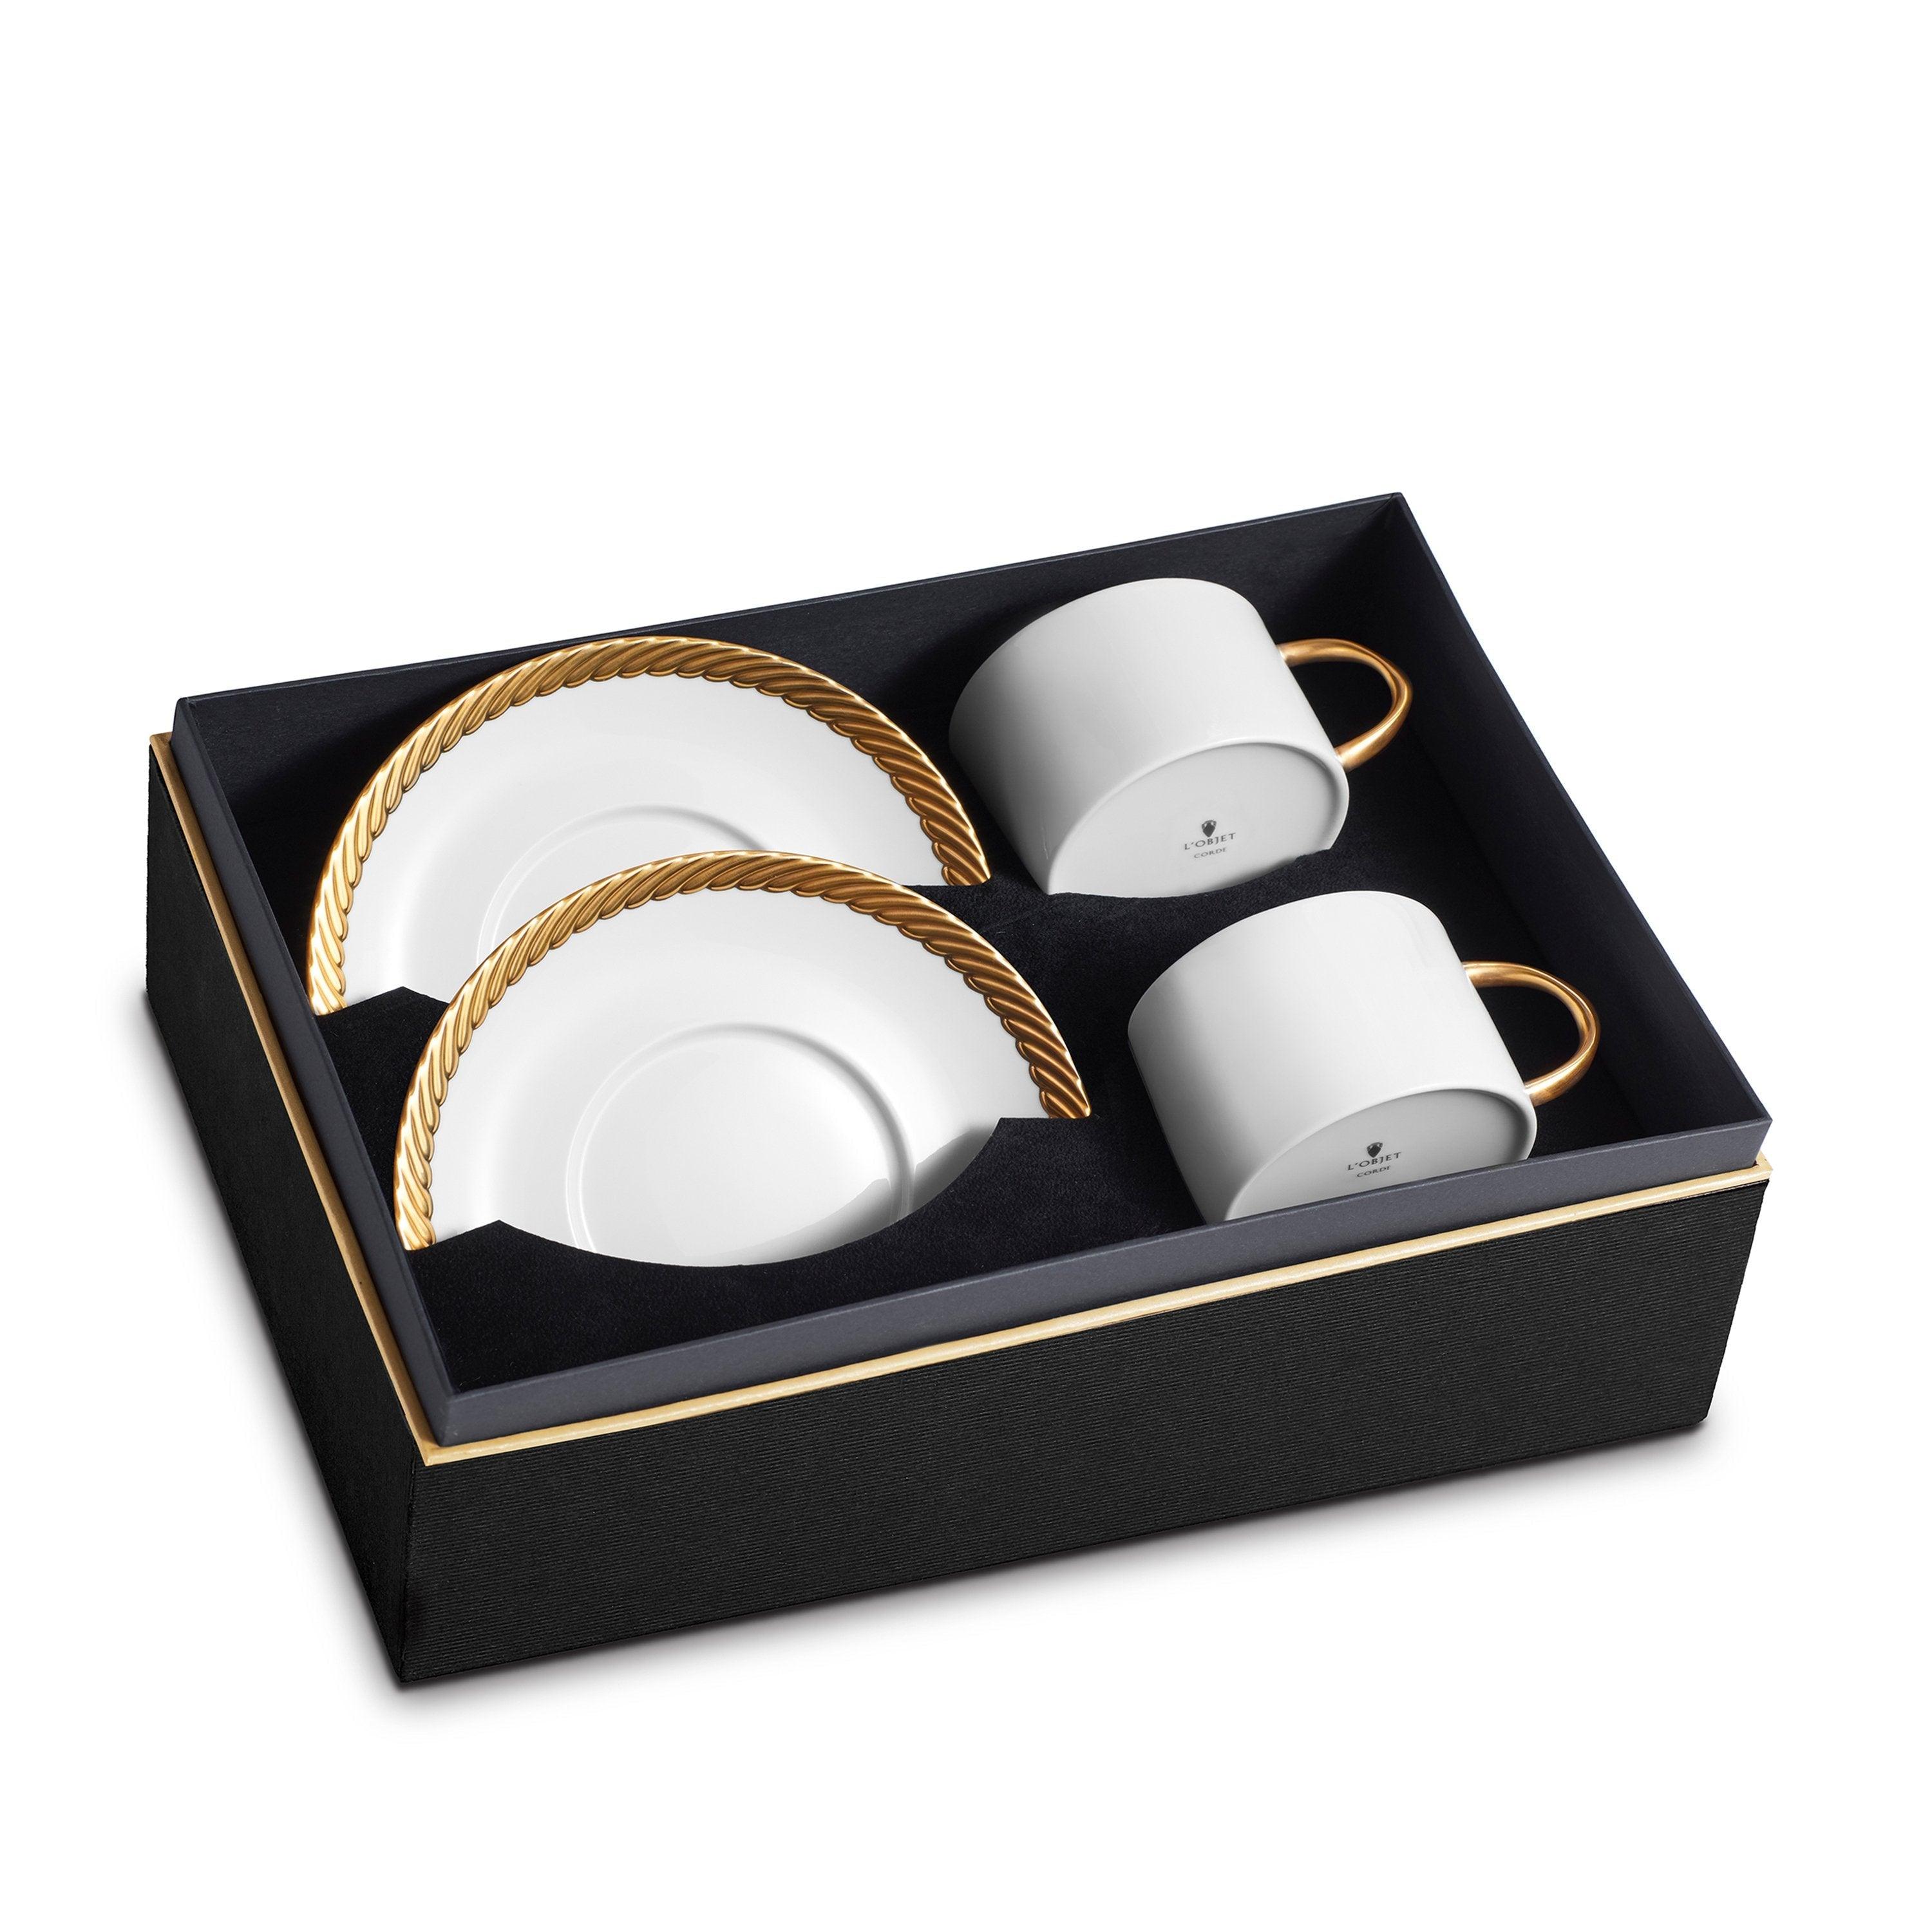 Teacup Premium Solid Brass Teacup and Saucer - 2 Sets, Gold, 130ml :  : Home